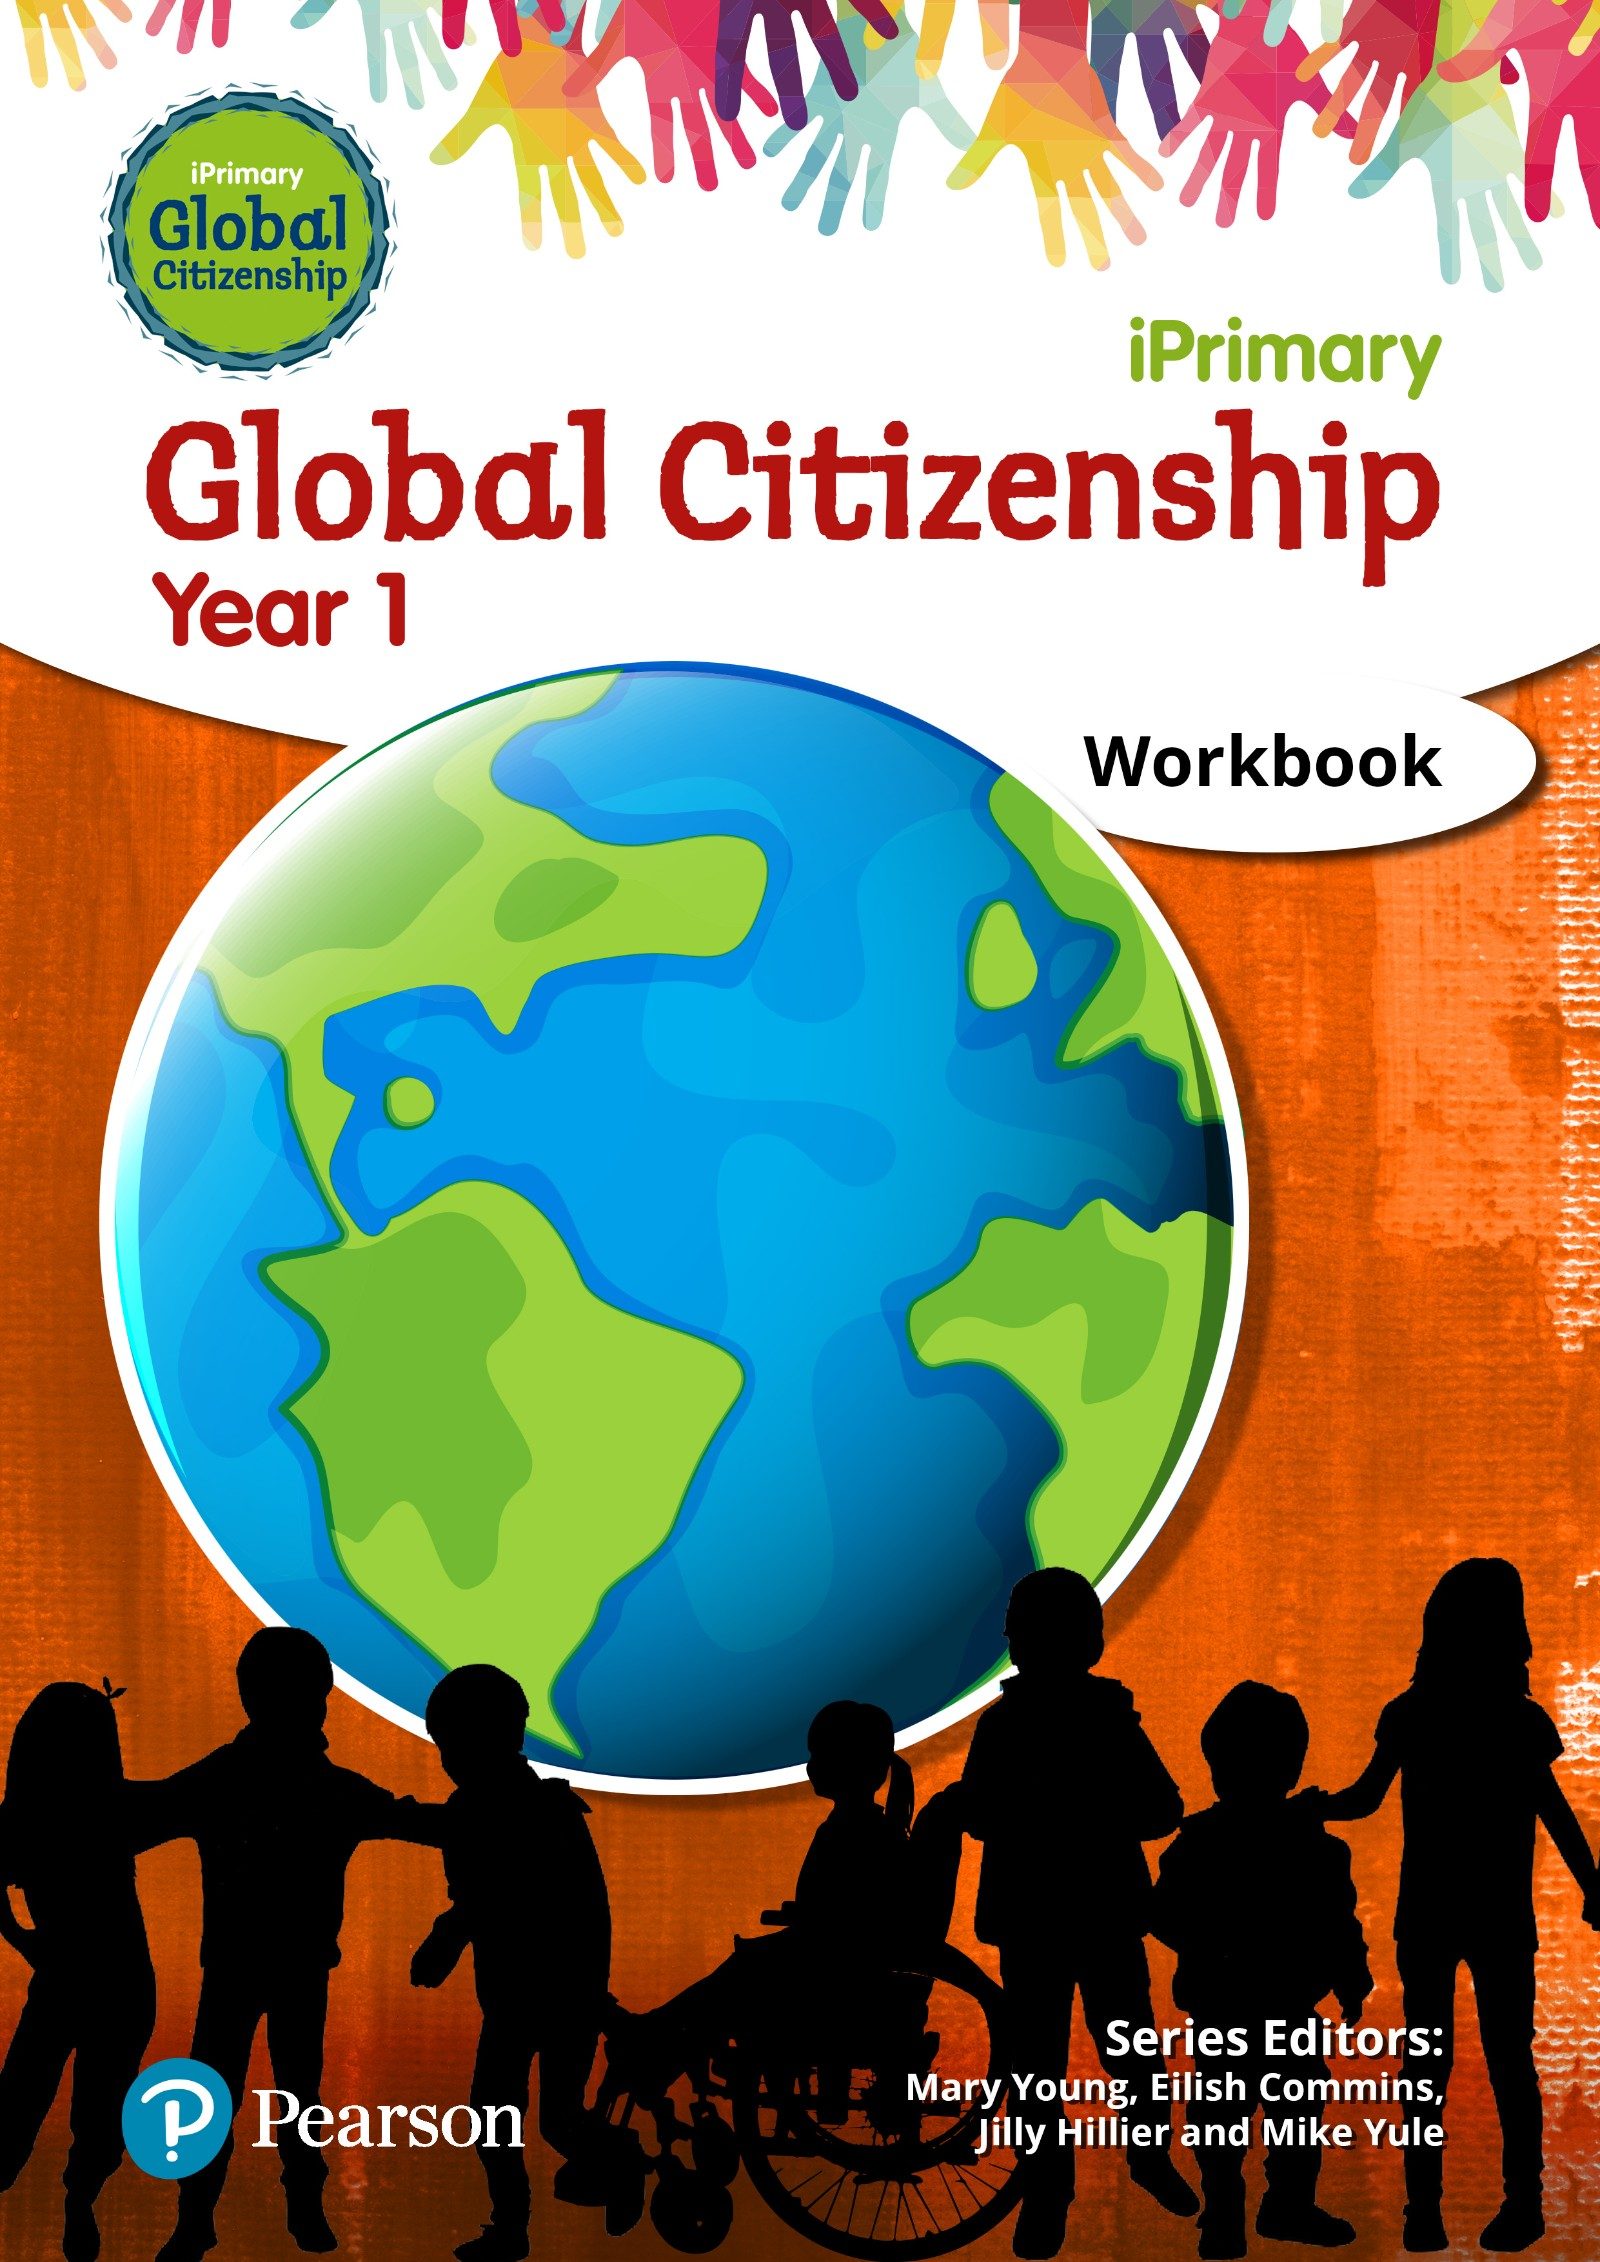 iPrimary Global Citizenship book